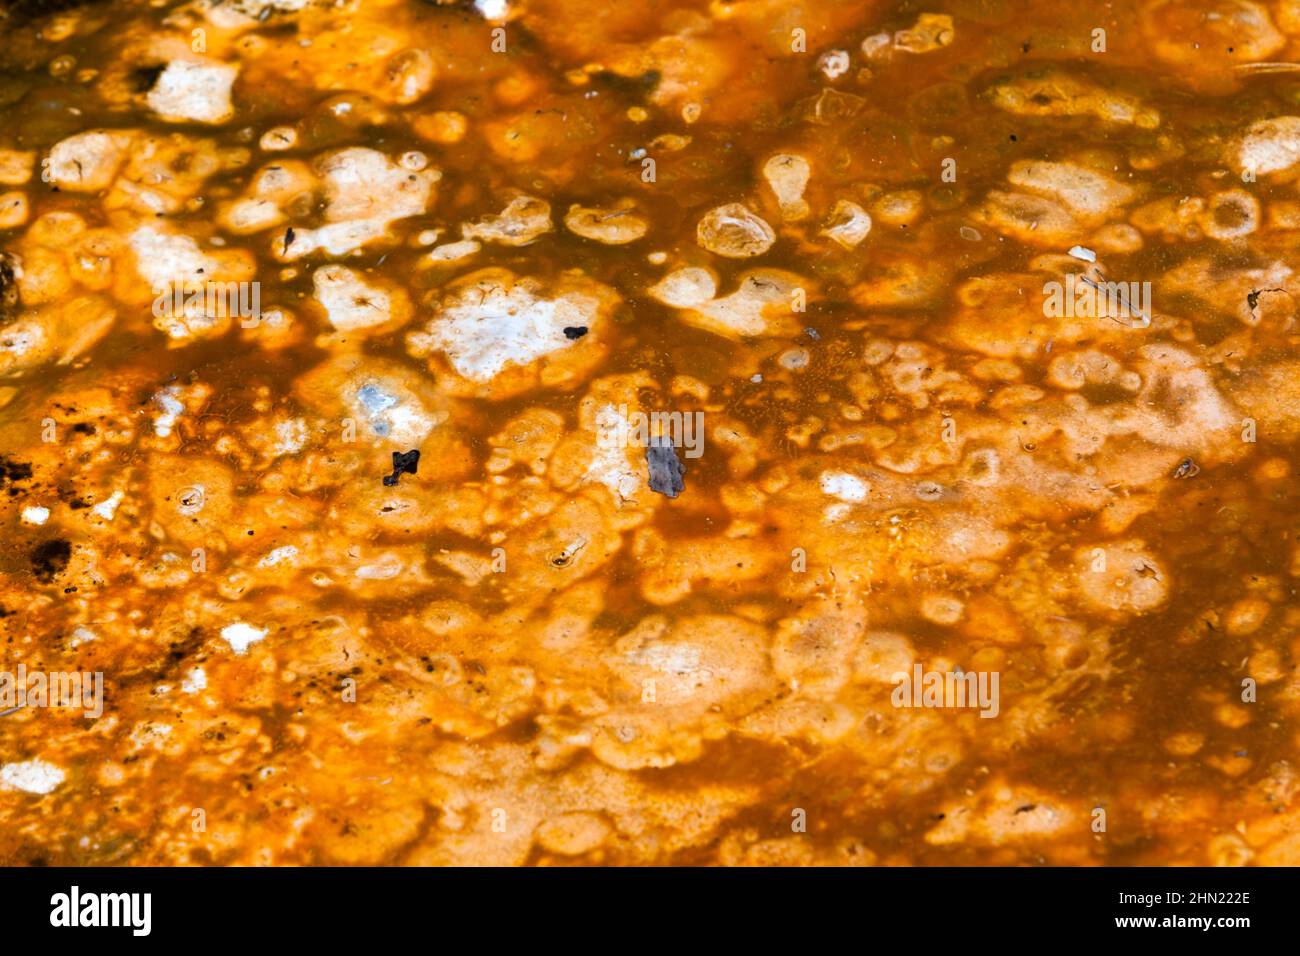 Bacterial mats in runoff water, Midway Geyser Basin, Yellowstone NP, Wyoming, USA Stock Photo